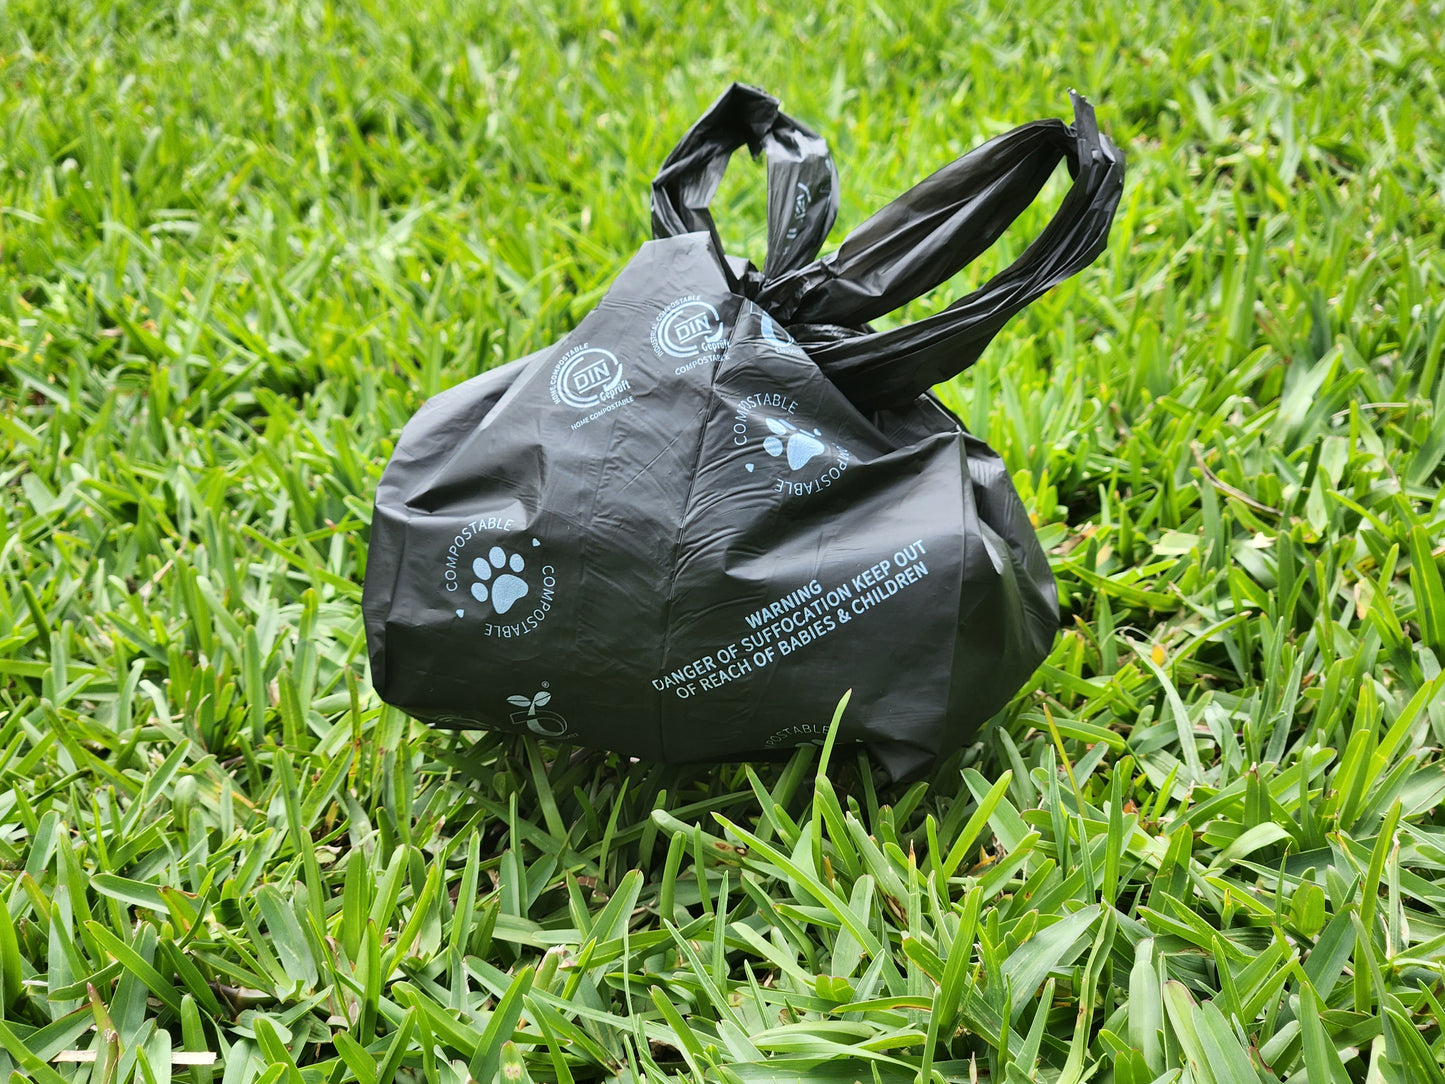 Furbubba Doggie Poop Bags on Grass, Compostable Cornstarch Dog Waste Bags. Biodegradable Dog Poo Brags